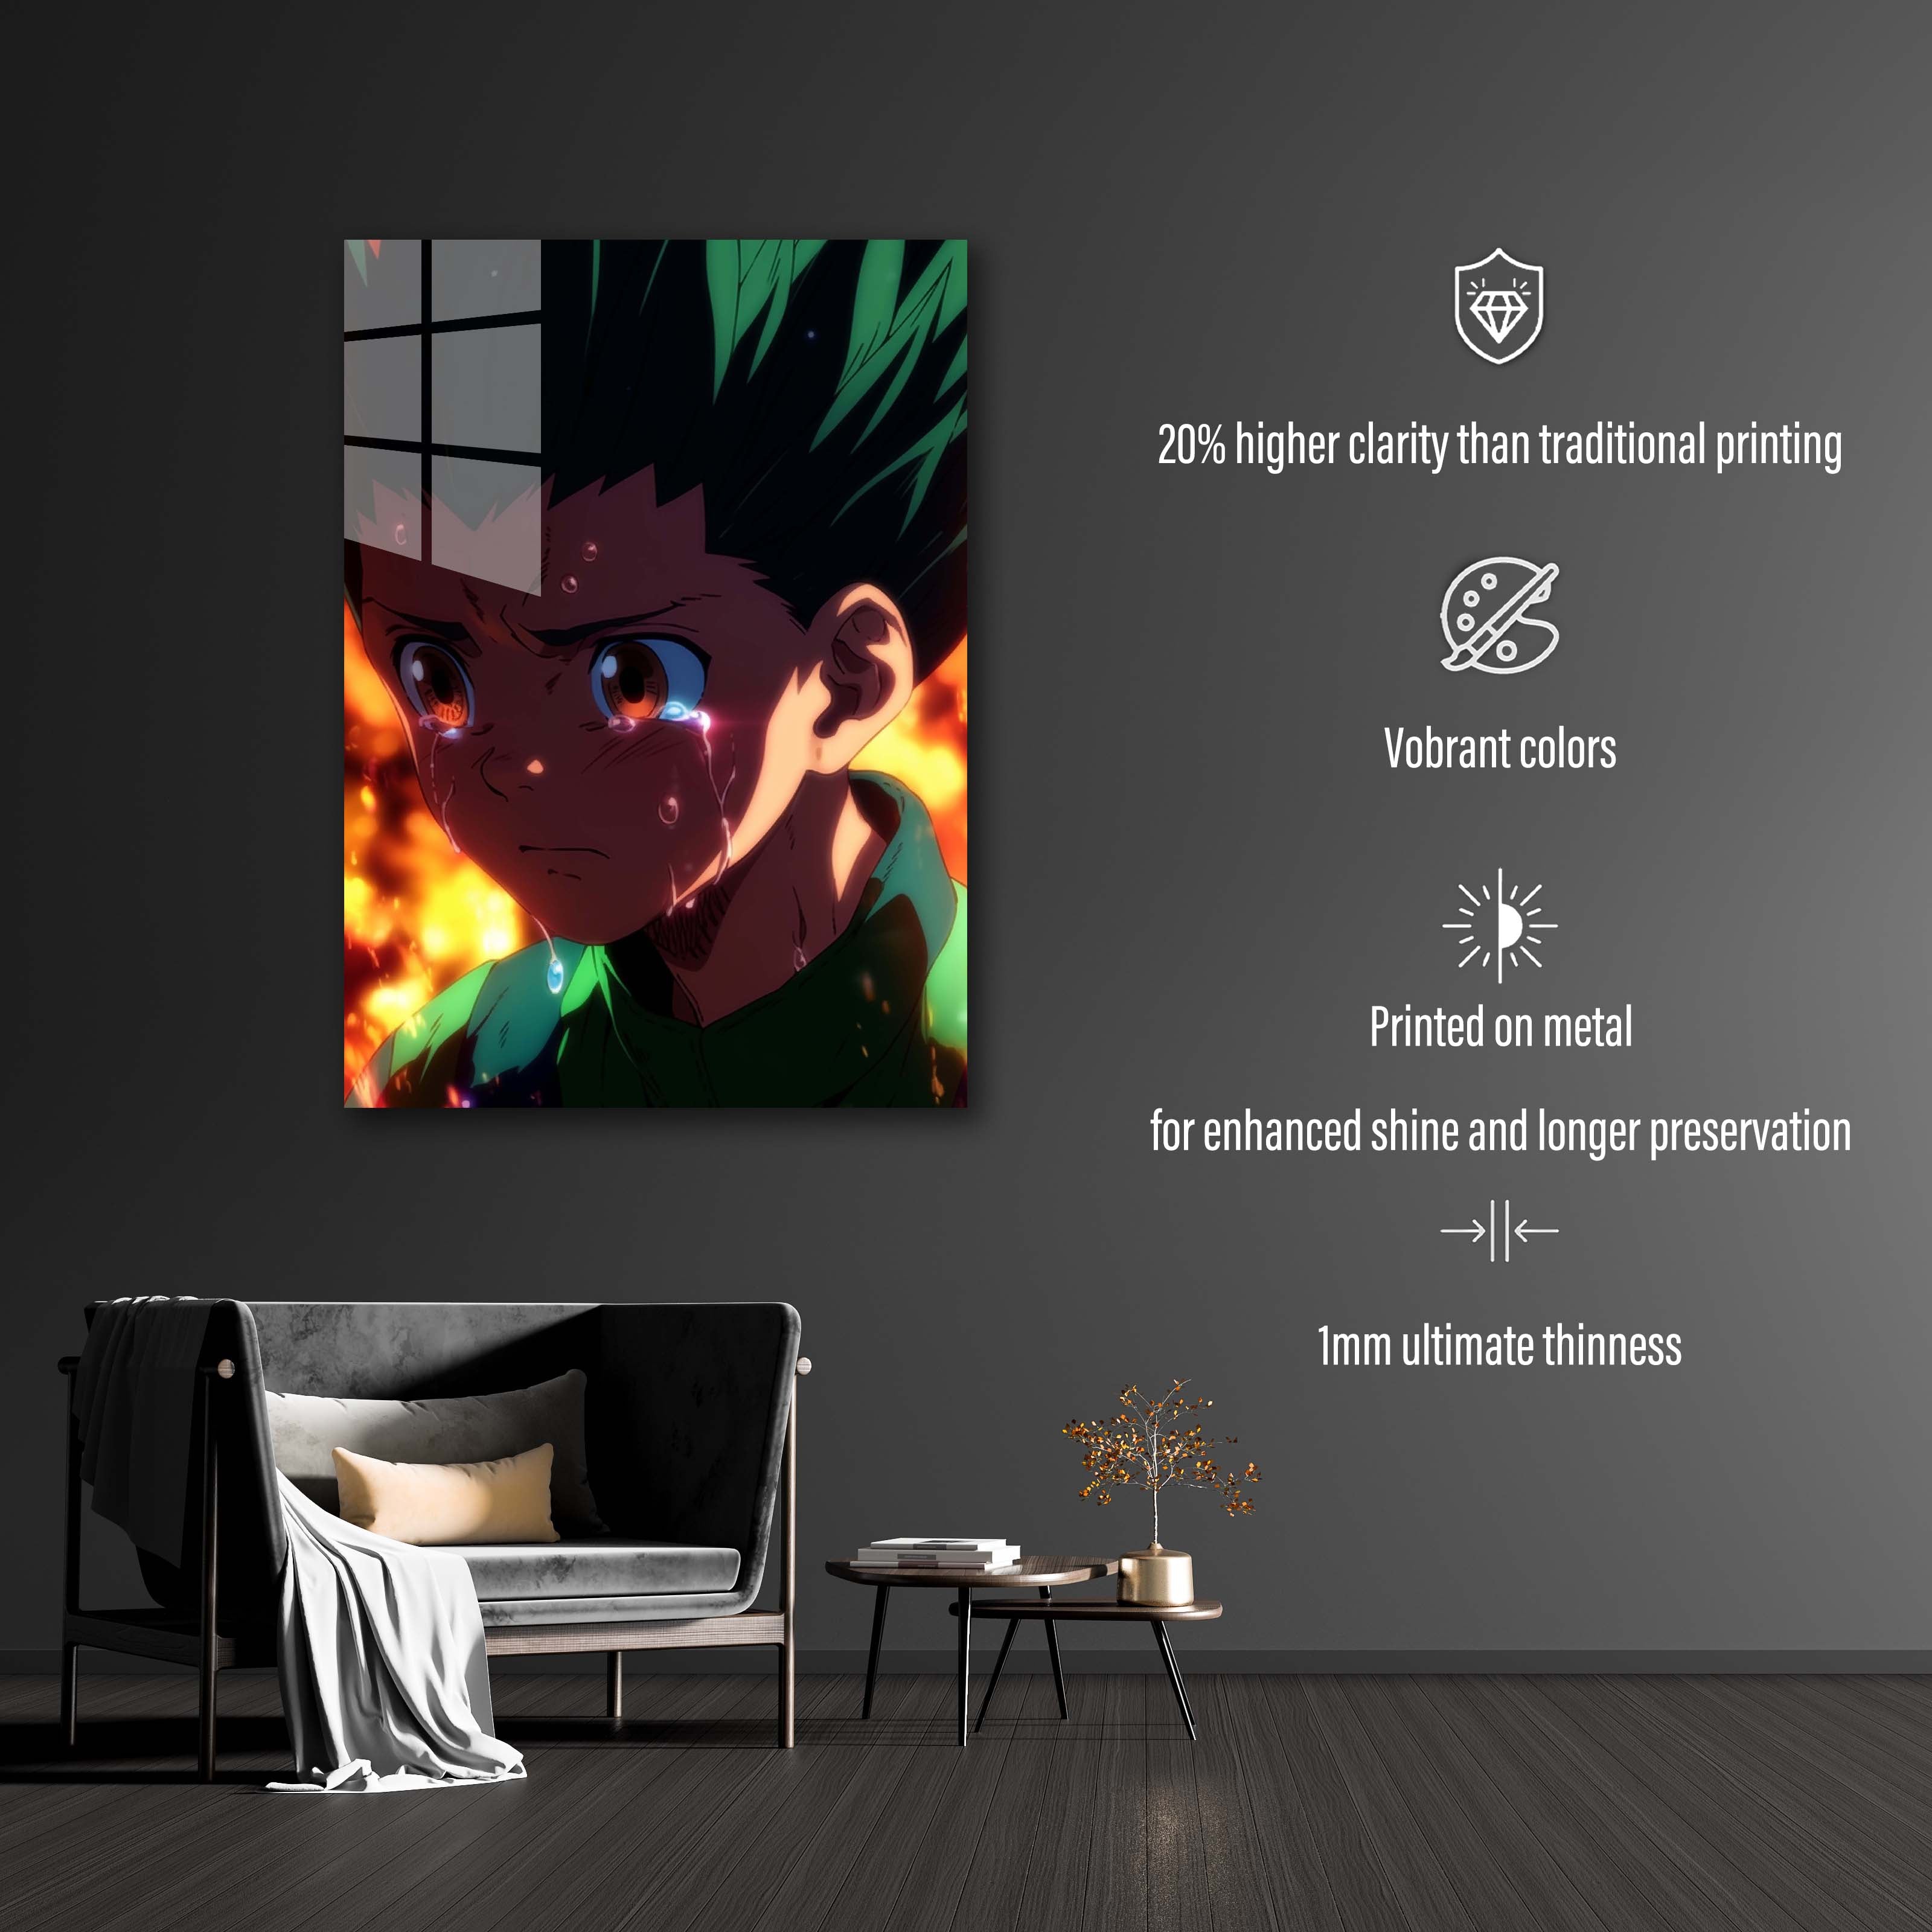 Gon Freecs-designed by @theanimecrossover